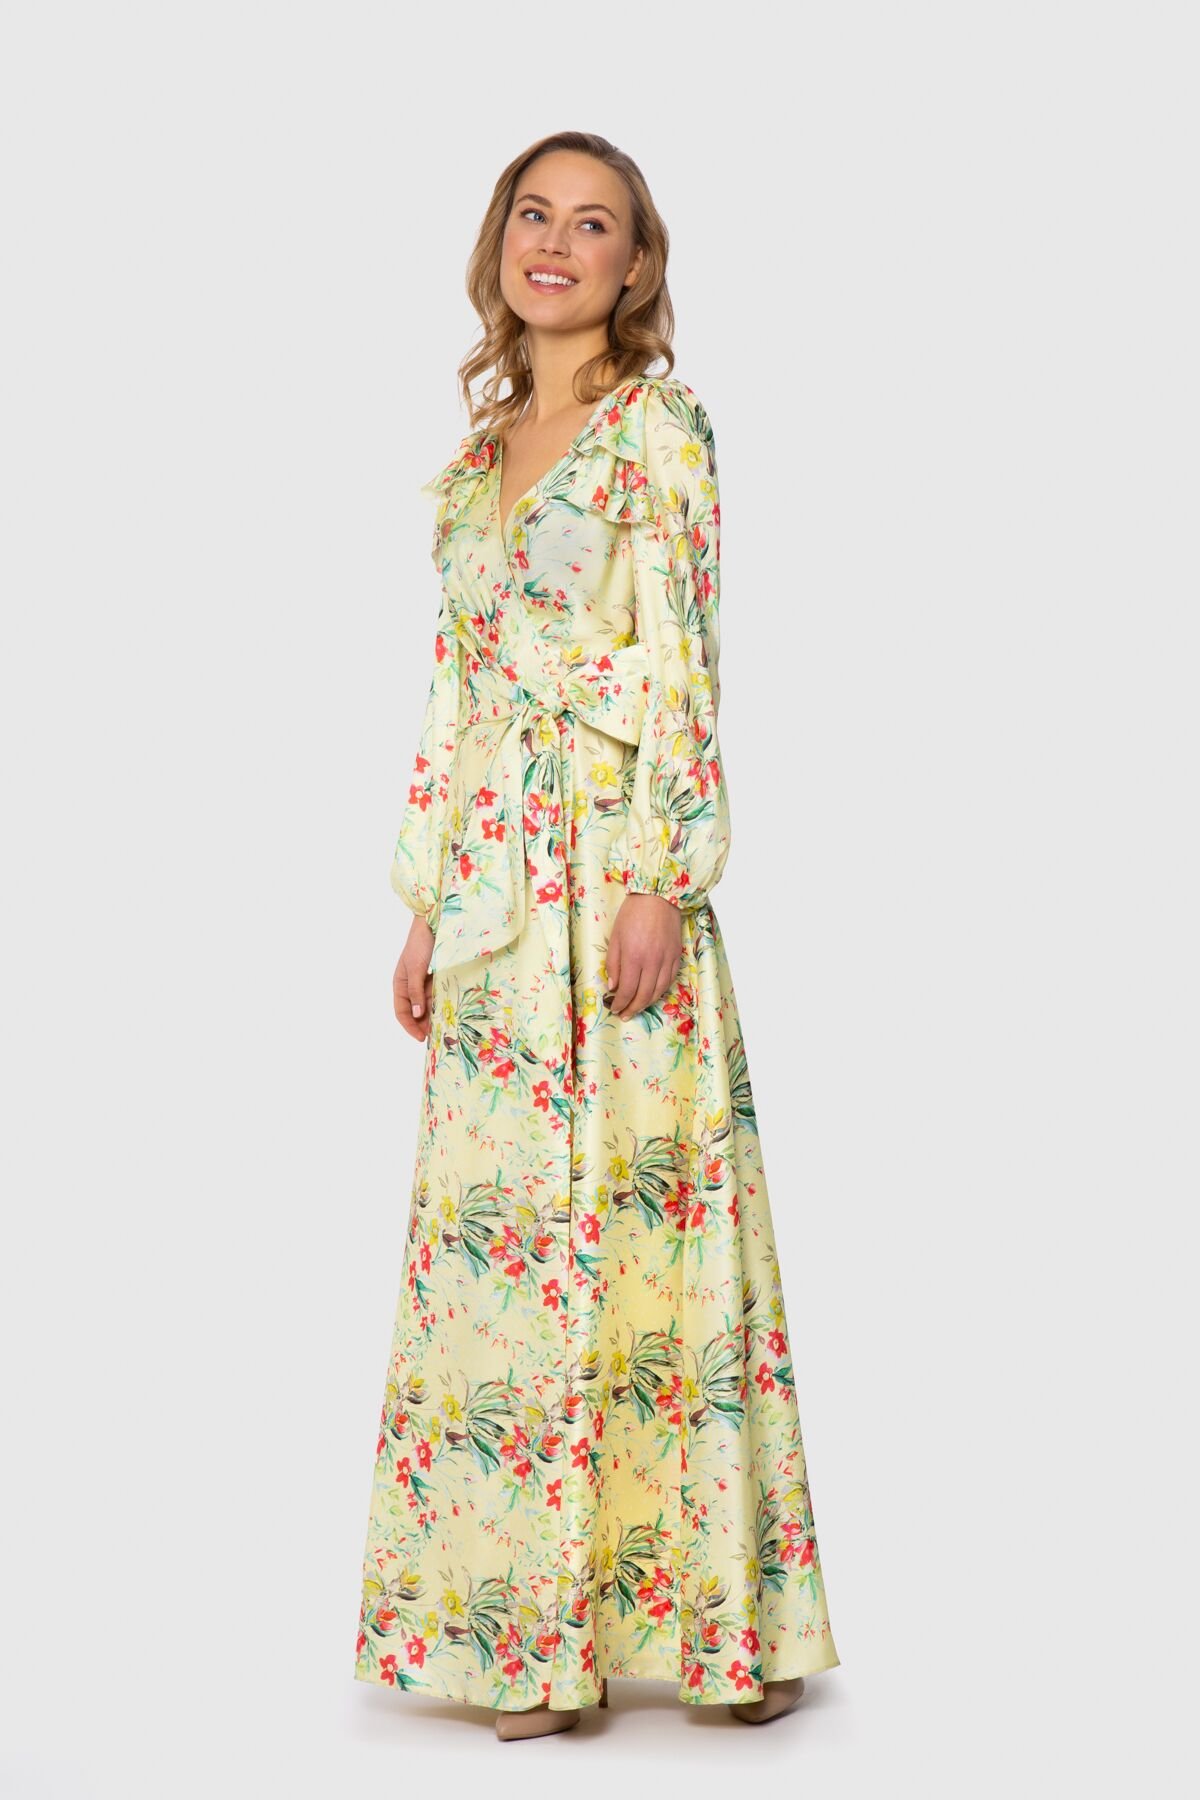 Belted Backless Floral Printed Yellow Dress